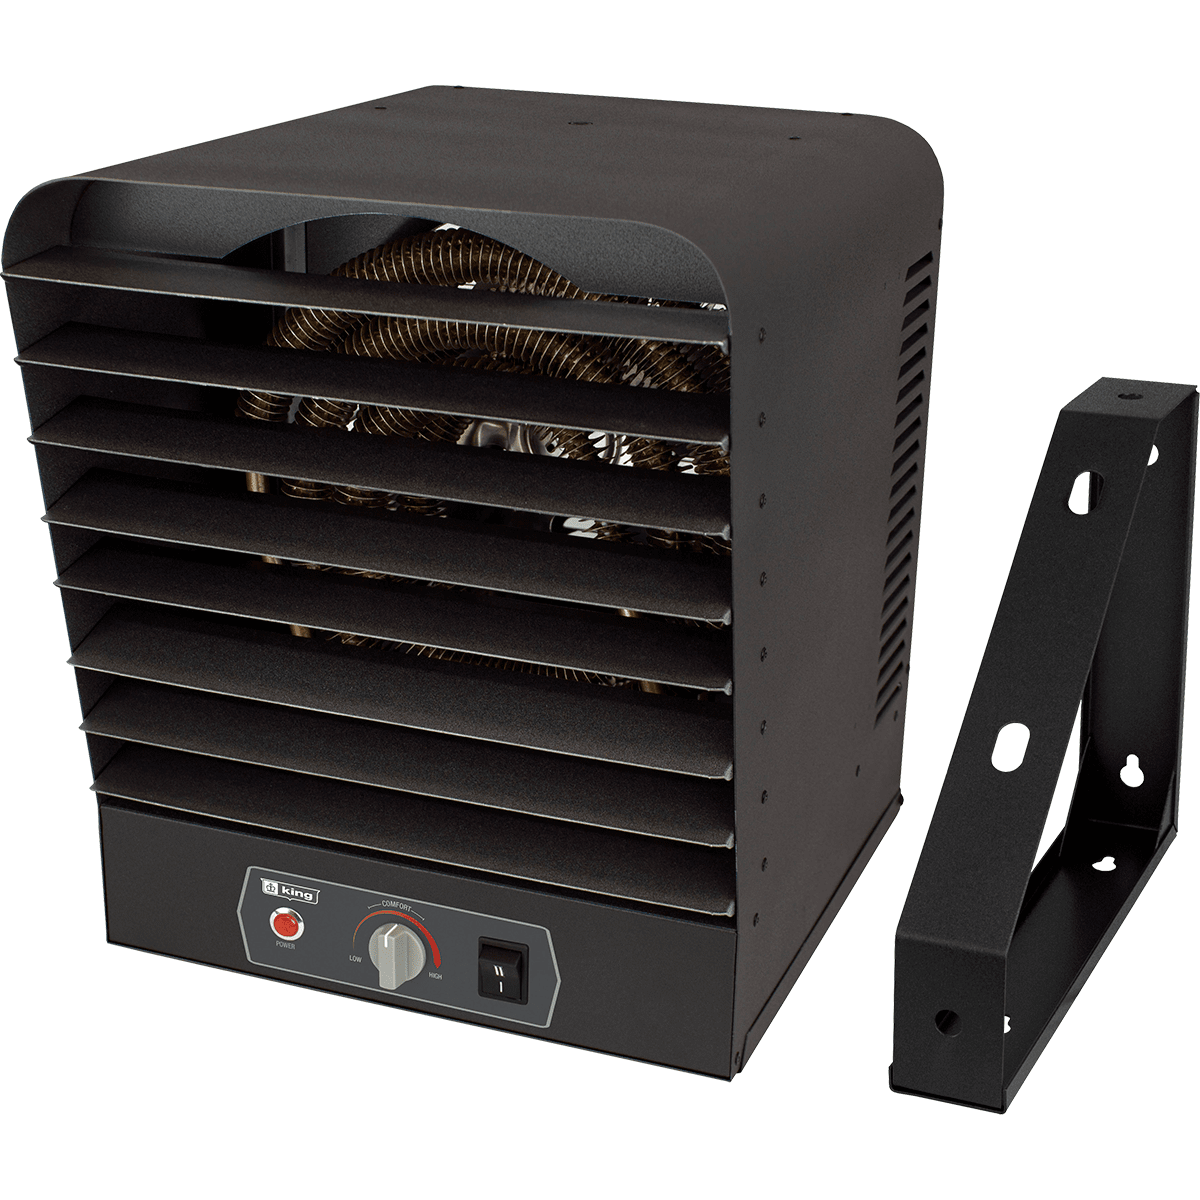 King Electric 240V Compact Garage Heater - 7,500 W